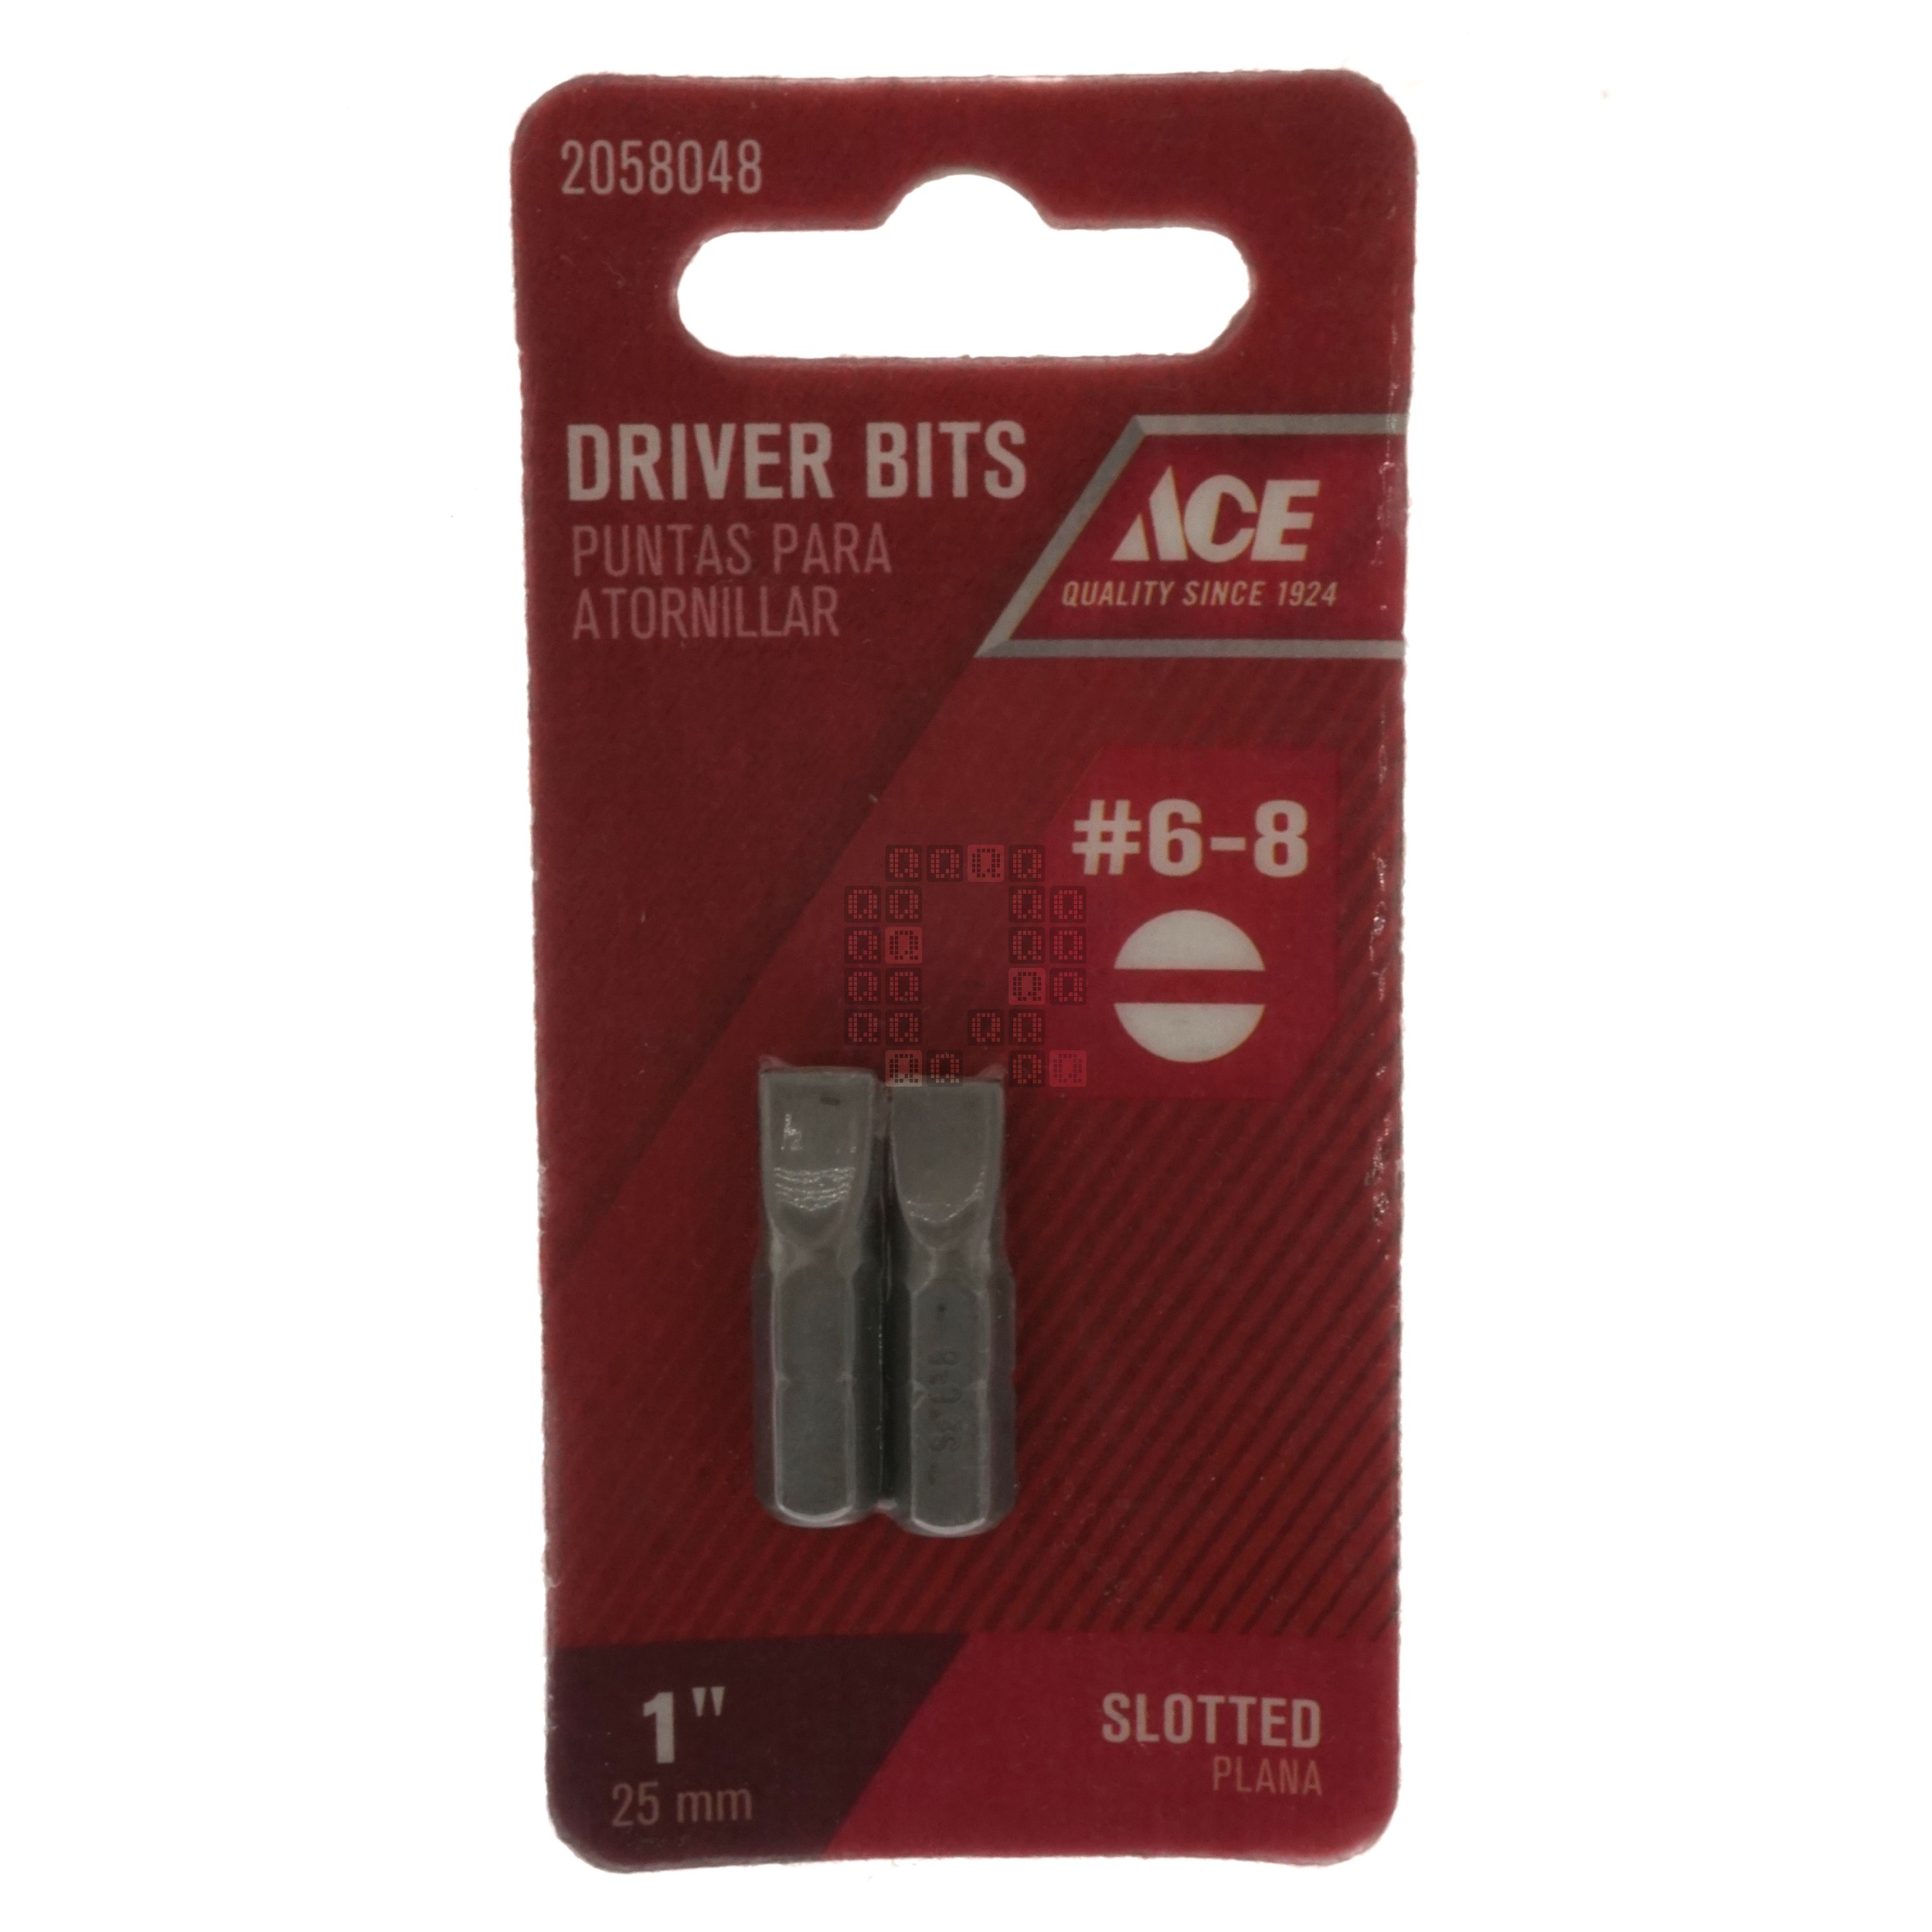 ACE Hardware 2058048 #6-8 Slotted Driver Bits, 1" Length, 1/4" Hex Drive, 2-Pack